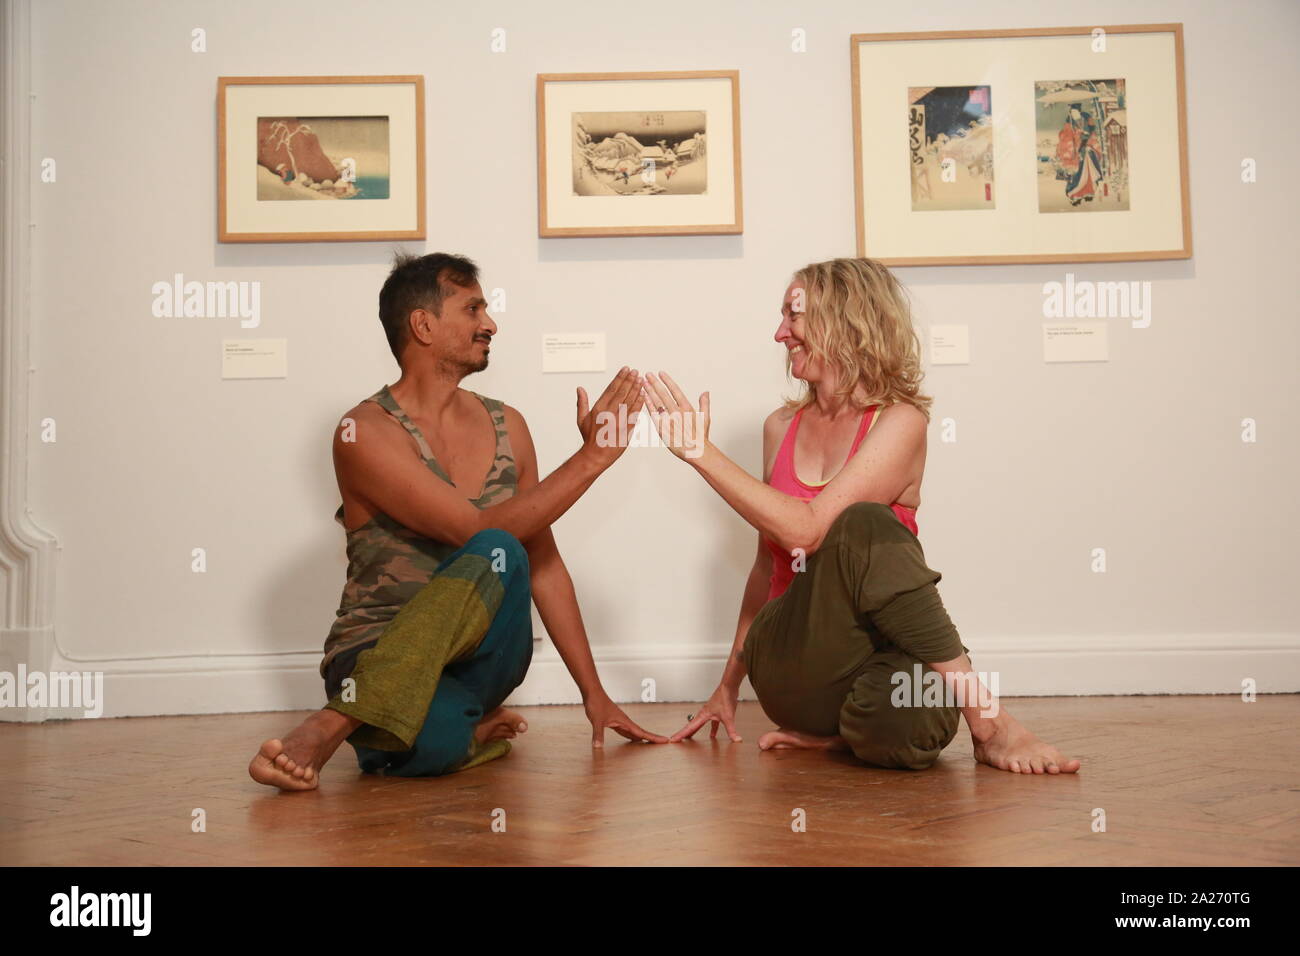 Brighton Museum & Art Gallery, Brighton & Hove Photo: Yoga teacher Cara Bowen and student Kam Ramen will lead a short yoga practice to promote the mindfulness events organised to accompany this exhibition. Floating Worlds opens to the public on Saturday 28 September 2019 to 12 January 2020 Free with Brighton Museum admission, members and residents free Come with us on a journey to explore the ‘floating worlds’ of Japan through woodcut prints from the Edo period (1615 -1868).  This exhibition invites you to experience the sights of 19th century Japan.  Guided by haiku poetry, immerse yourself i Stock Photo